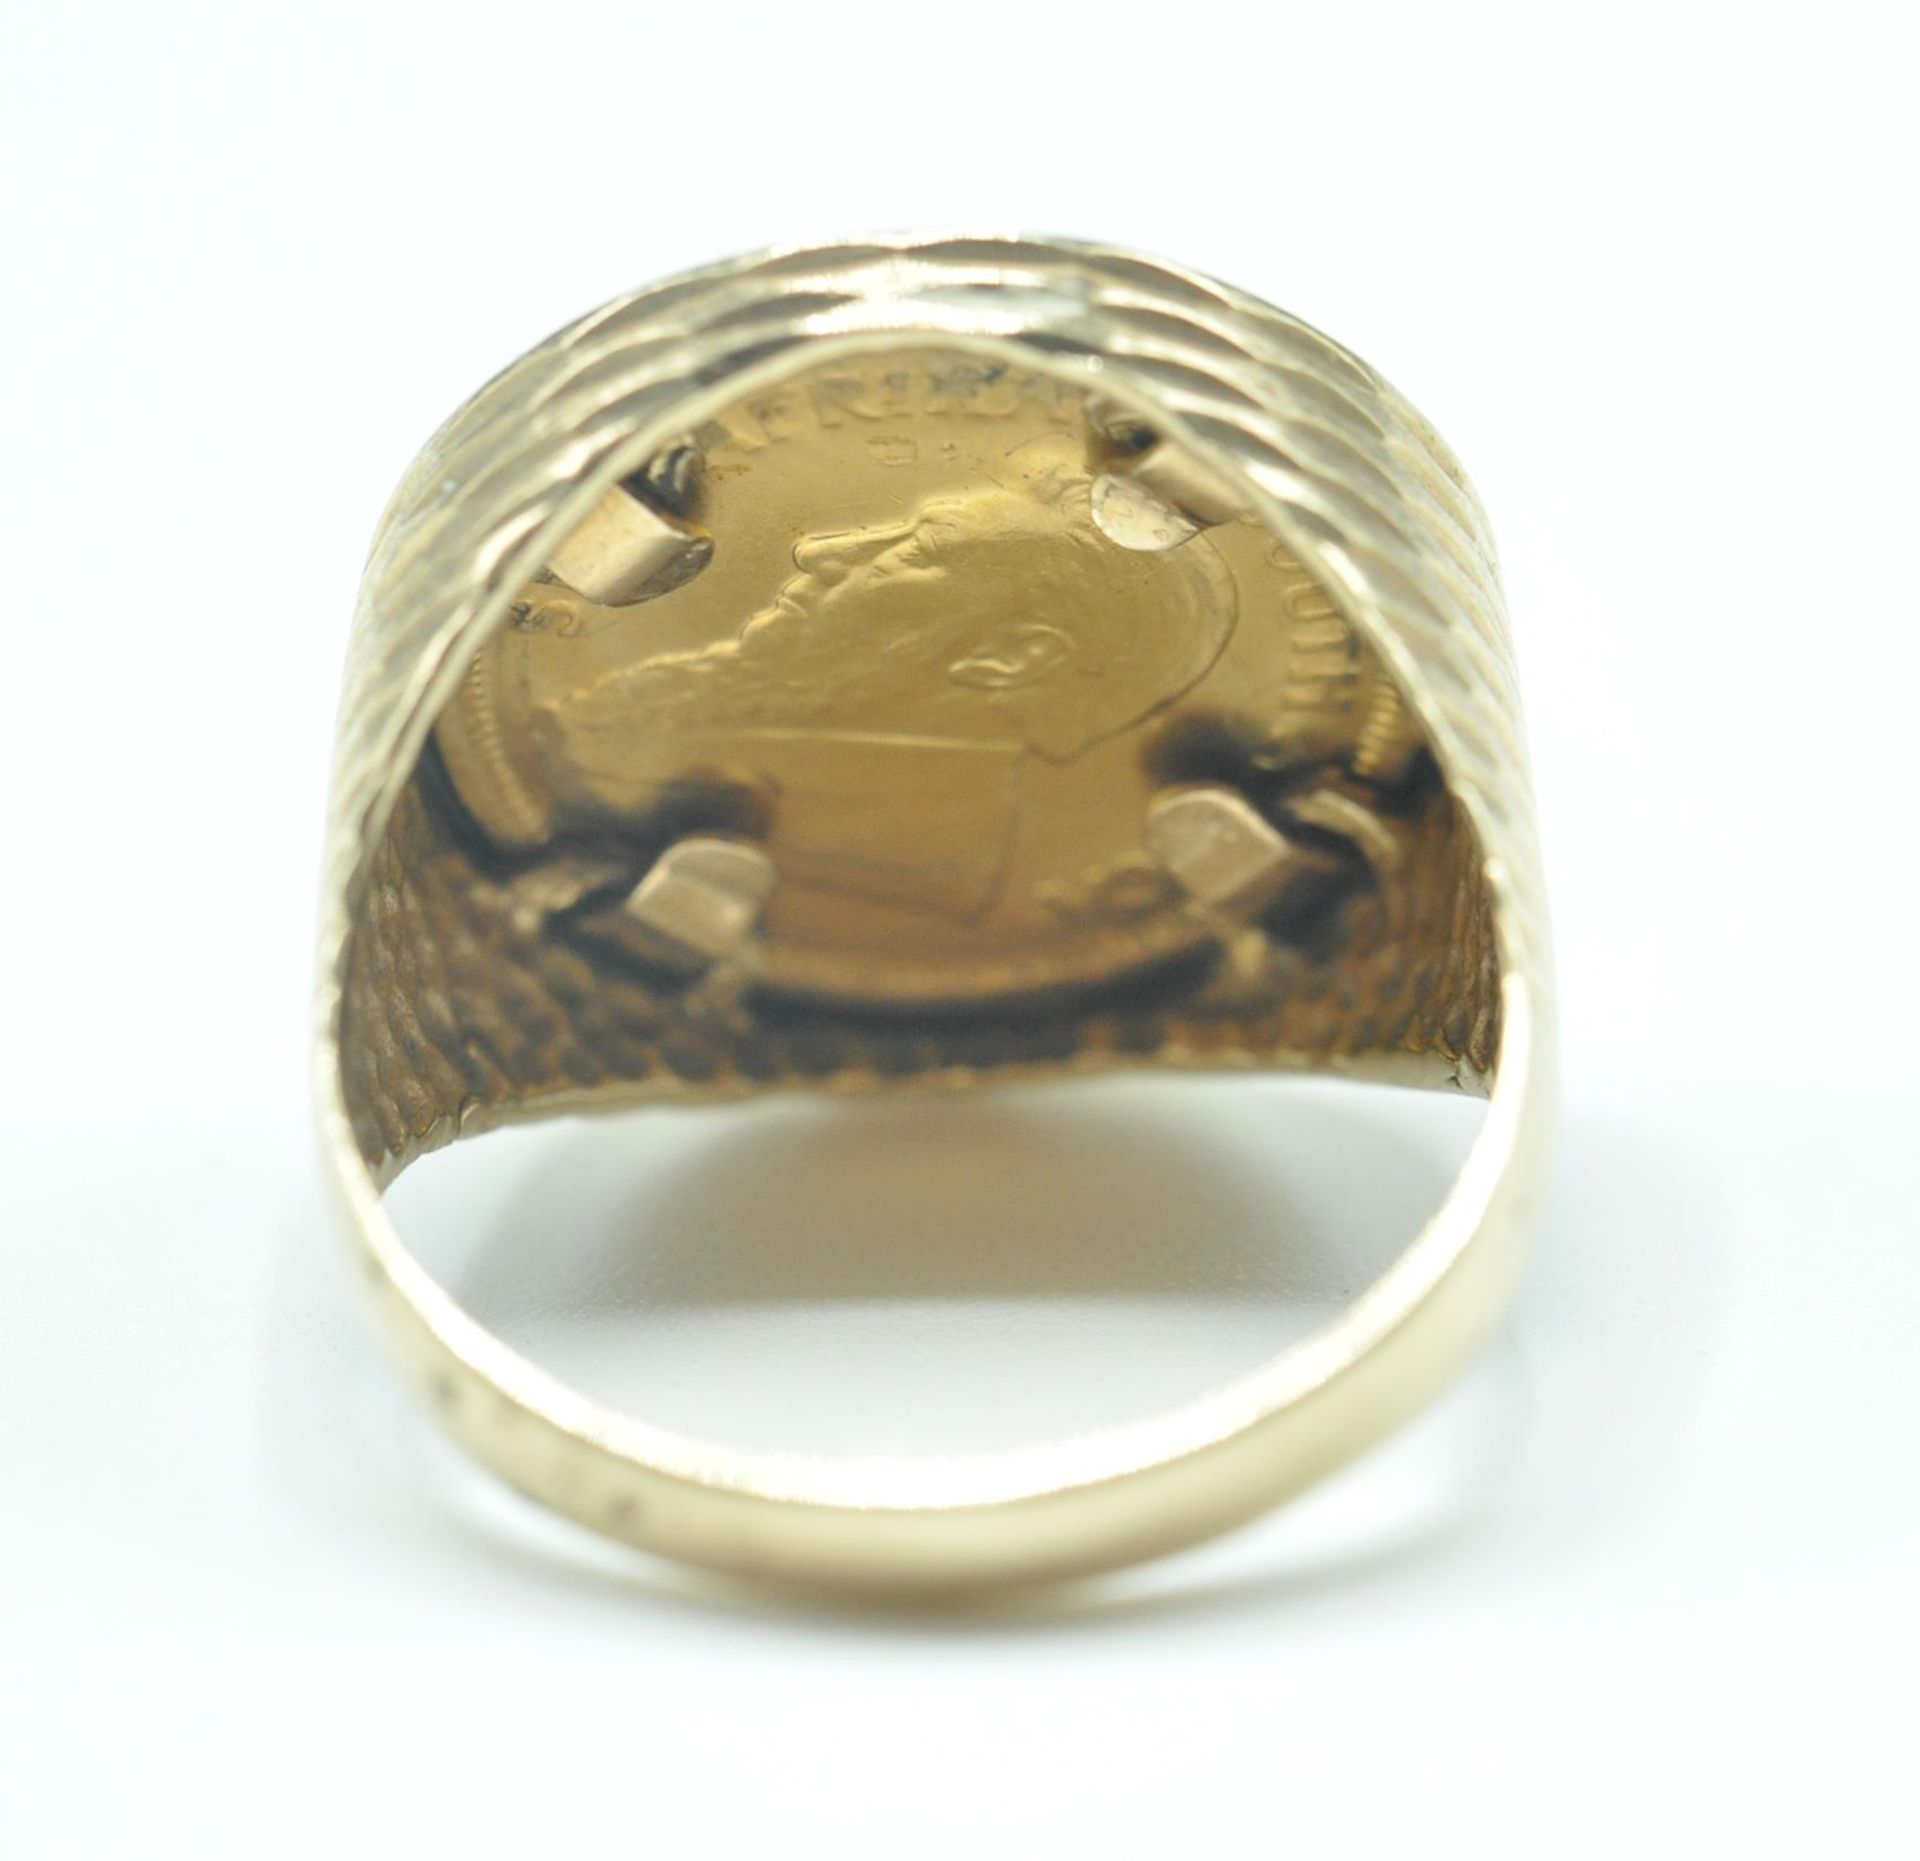 1984 SOUTH AFRICAN 1 /10 KRUGERRAND IN 9CT GOLD RING - Image 4 of 7